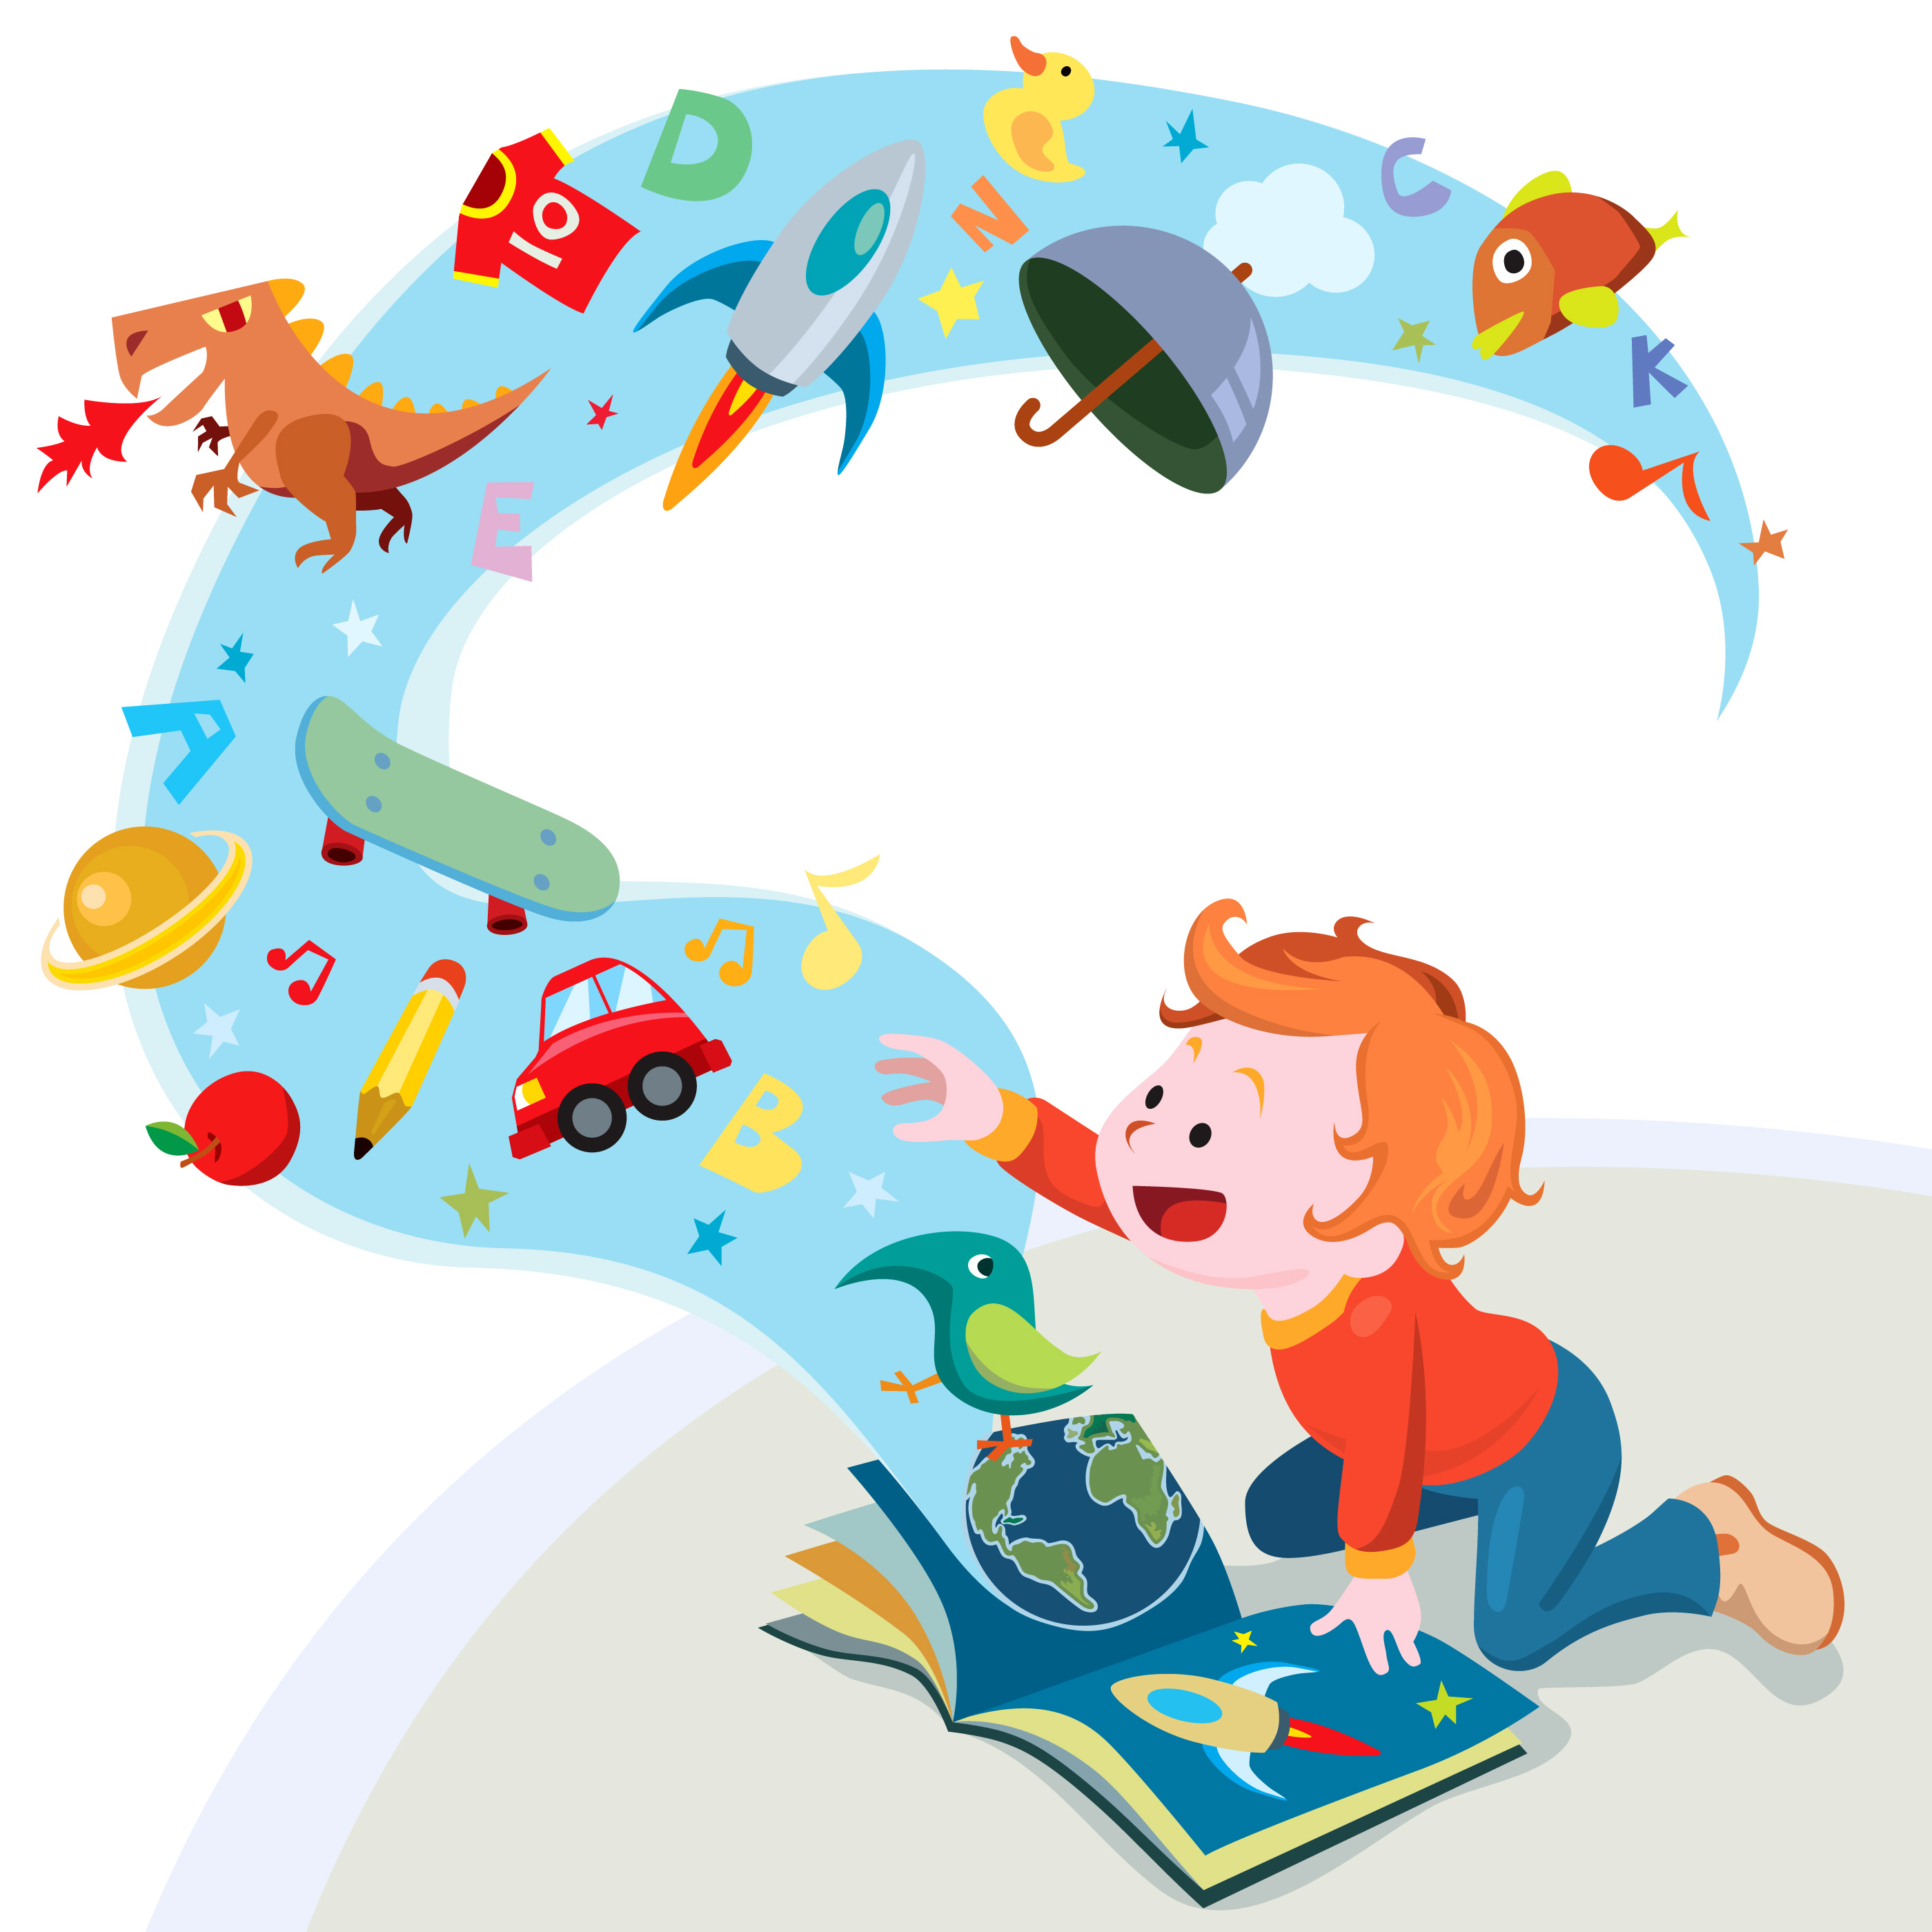 literacy clipart daycare